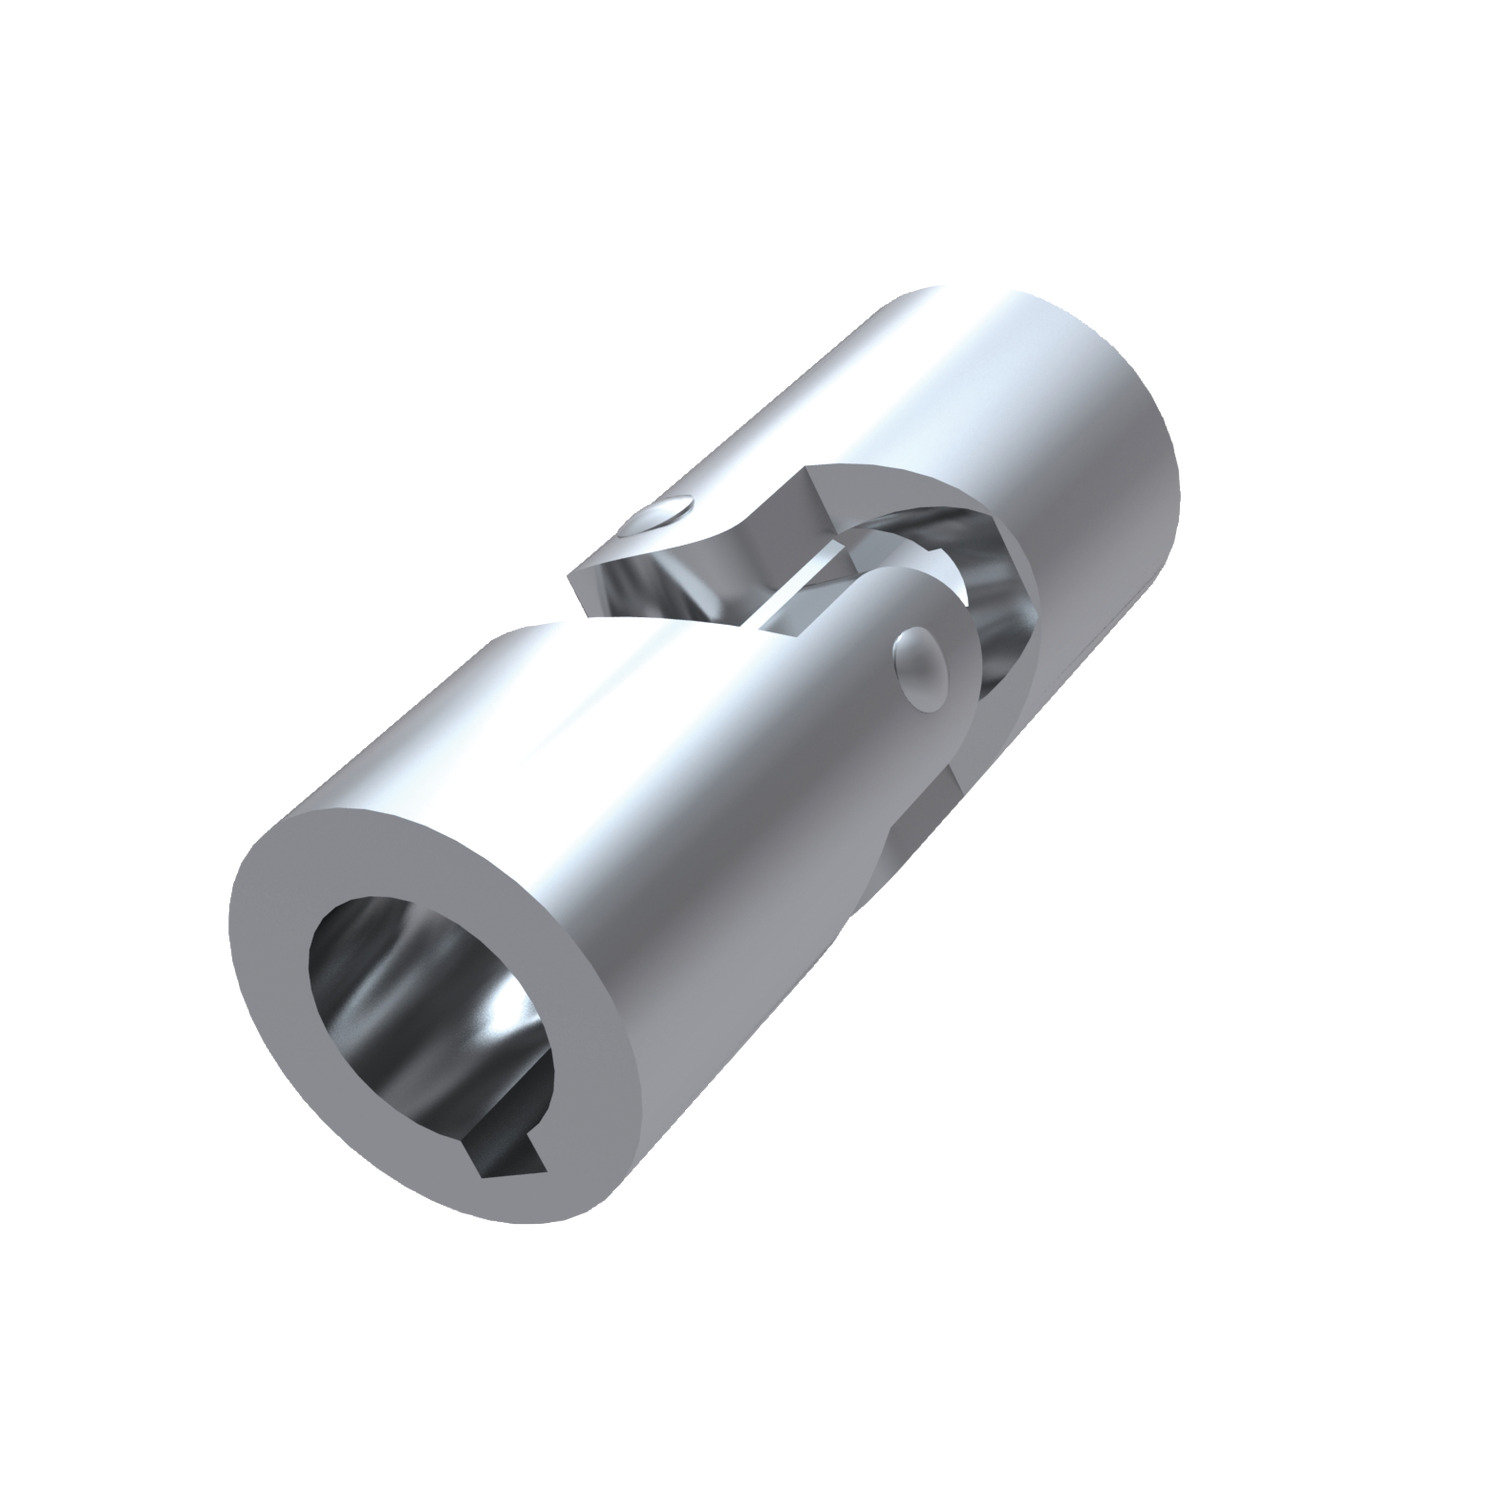 Single Universal joint Single universal joint with needle roller bearing. Suitable for speeds up to 4000rpm.